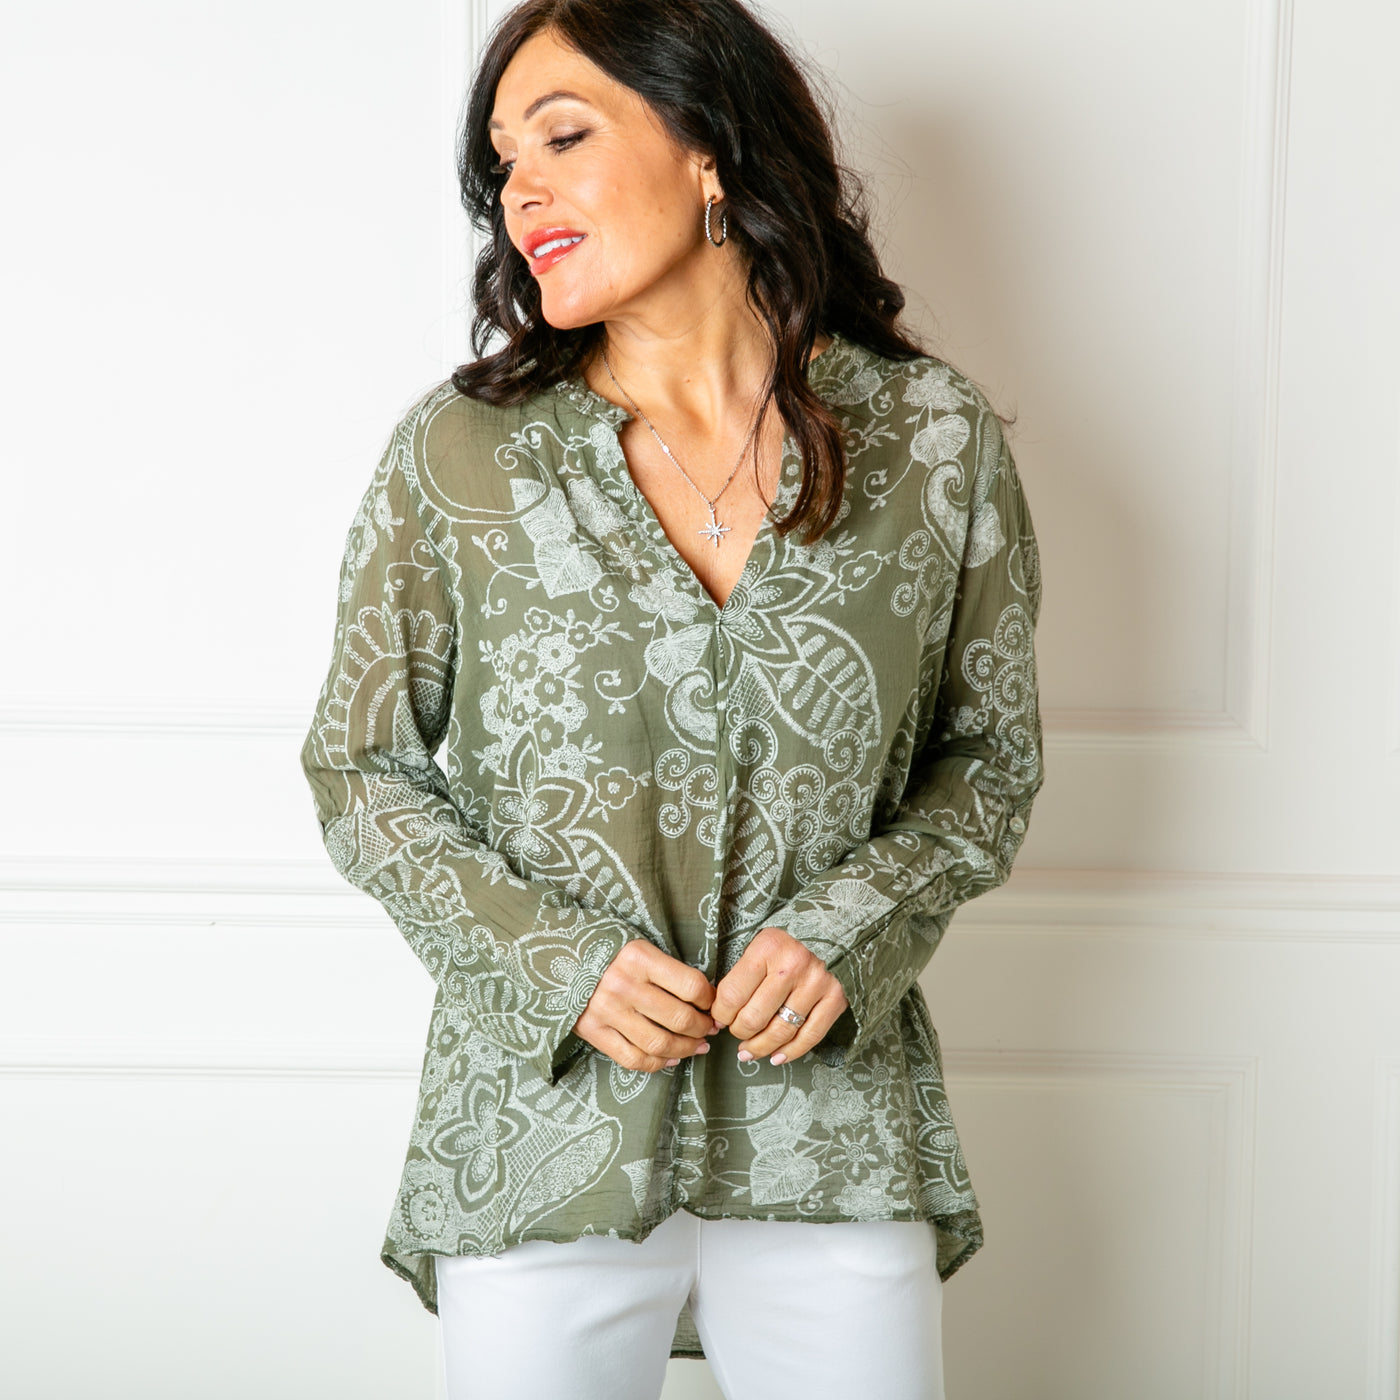 The khaki green Botanical Cotton Blouse with long sleeves that can be rolled up and buttoned at the elbow